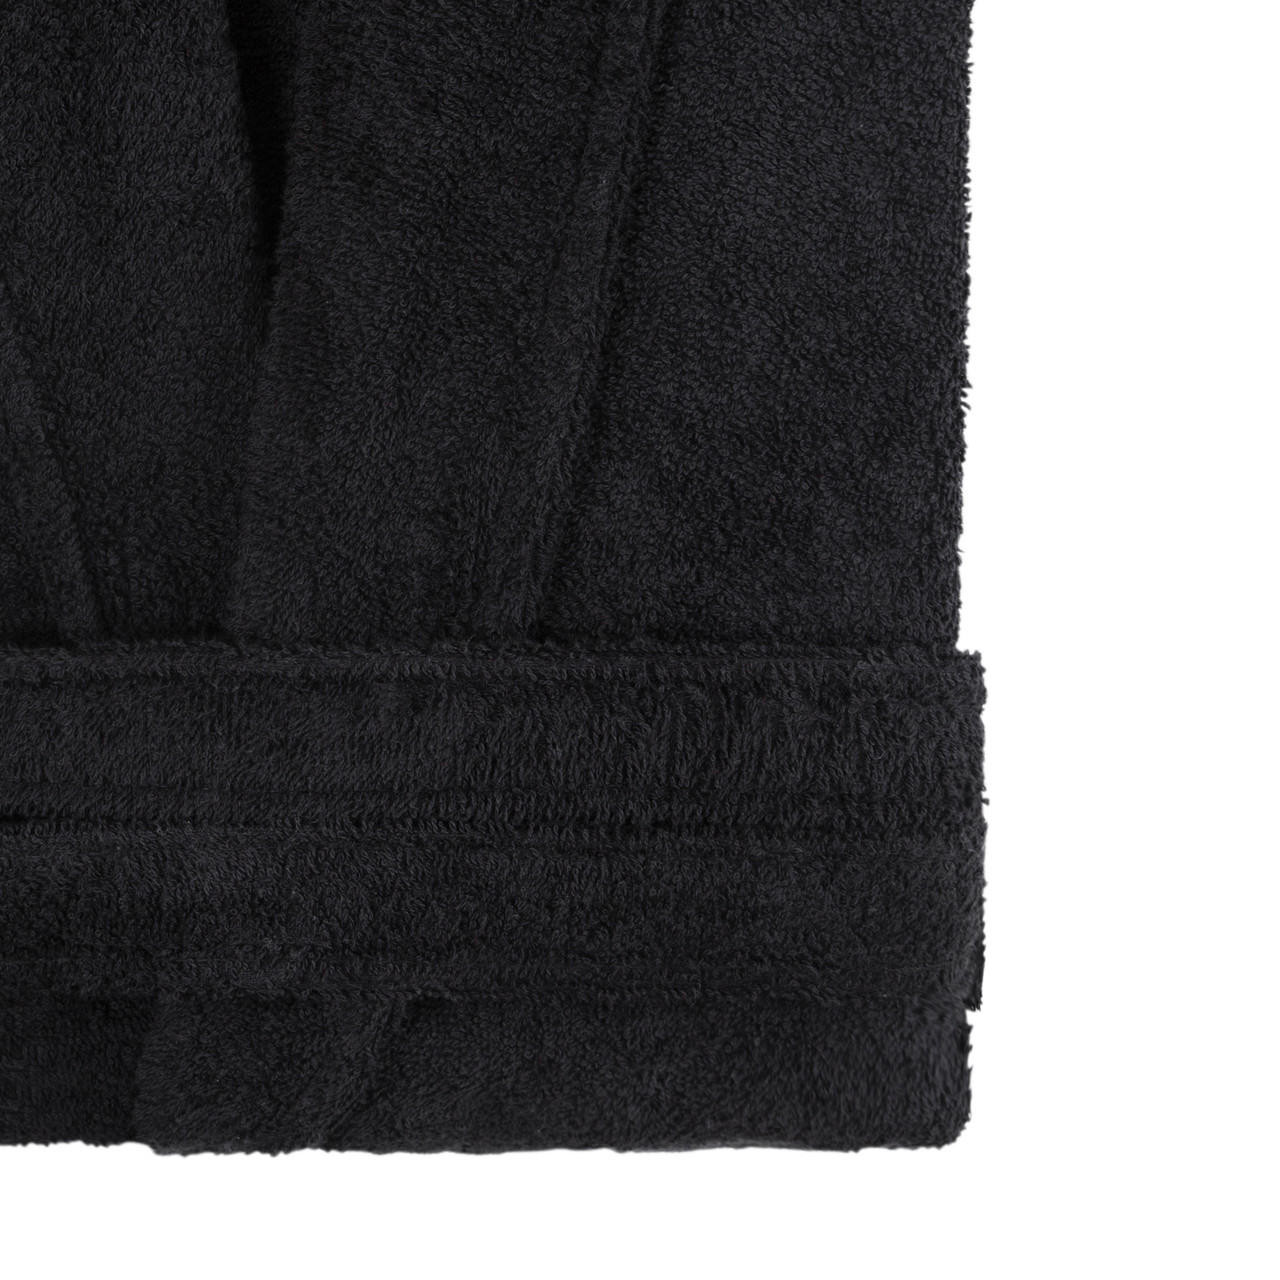 Low Cost Luxury Terry Towelling Bath Robes Super Quality With Price Promise  Guarantee